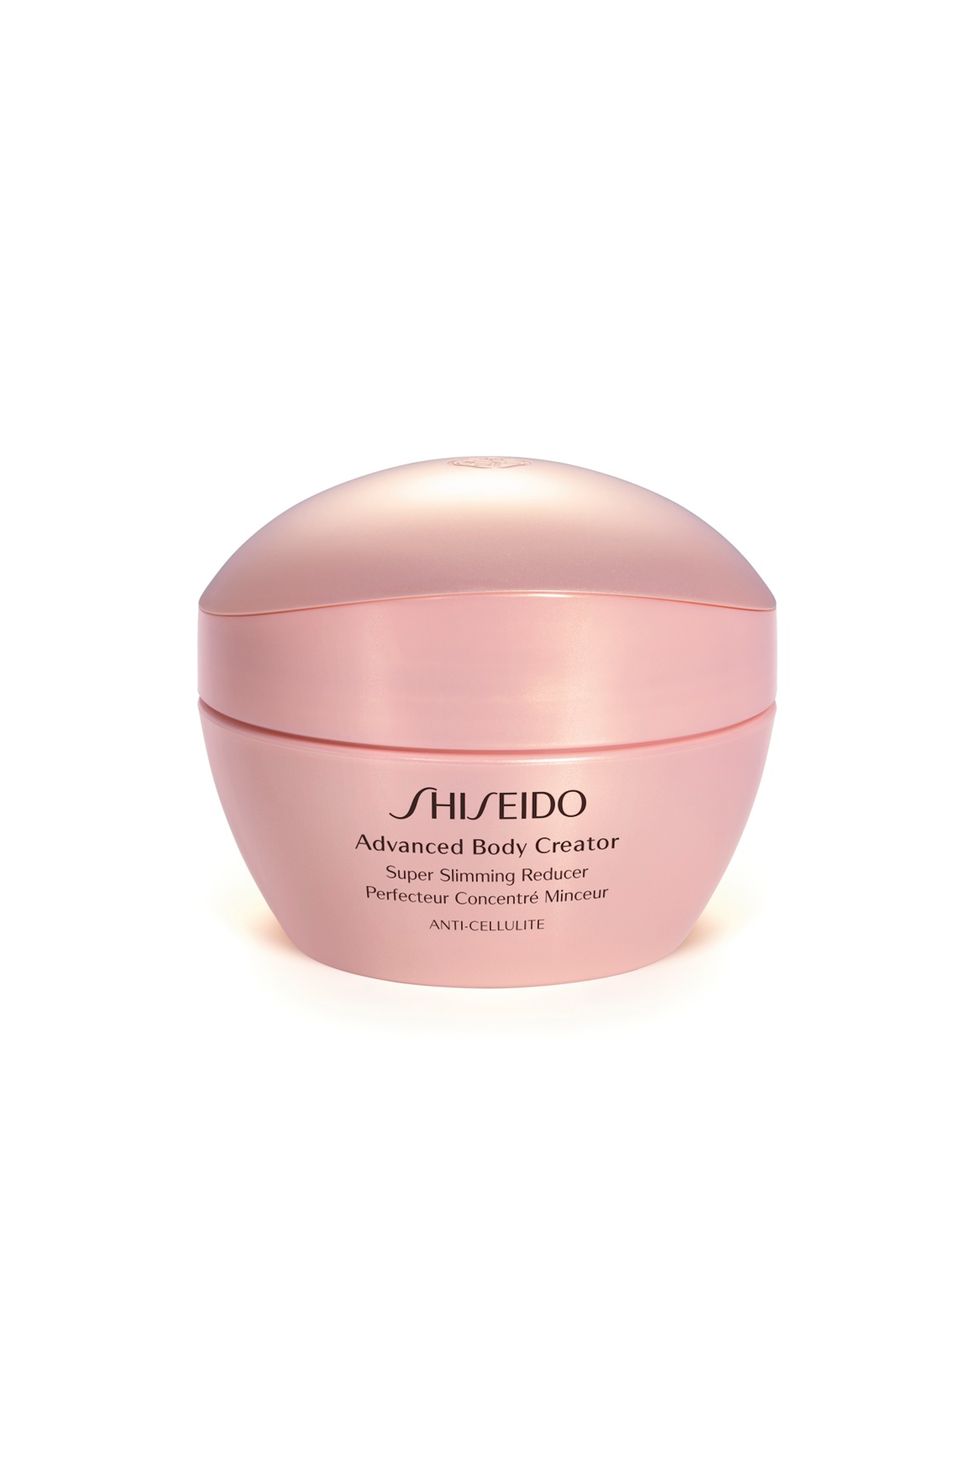 <p>While your run-of-the-mill body cream can be a budget beauty buy, if you want targeted care, prepare to spend a little more. Premium brands still take the cake in body technology, and paired up with your fitness regime, can really boost effects.</p>
<p><a href="http://www.houseoffraser.co.uk/Shiseido+Advanced+Body+Creator+Super+Slimming+Reducer/183428393,default,pd.html" target="_blank">Shiseido Advanced Body Creator Super Slimming Reducer (£54)</a> is innovative, boasting fat fighting capsules that will burn fat easier and reduce cellulite. You won't lose dress sizes overnight but it boosts sluggish circulation, and rubbed into skin daily, breaks down that pesky orange peel skin.</p>
<p><a href="http://cosmopolitan.co.uk/beauty-hair/news/trends/beauty-products/new-season-budget-beauty-buys?click=main_sr" target="_blank">30 NEW SEASON BUDGET BUYS UNDER £20</a></p>
<p><a href="http://preview.www.cosmopolitan.co.uk/beauty-hair/beauty-tips/beauty-buys-you-can-save-on" target="_blank">BEAUTY BITS TO BUY FOR UNDER £5</a></p>
<p><a href="http://cosmopolitan.co.uk/beauty-hair/beauty-tips/budget-beauty-tips-fashion-products?click=main_sr" target="_blank">BUDGET BEAUTY TIPS TO LOOK FABULOUS</a></p>